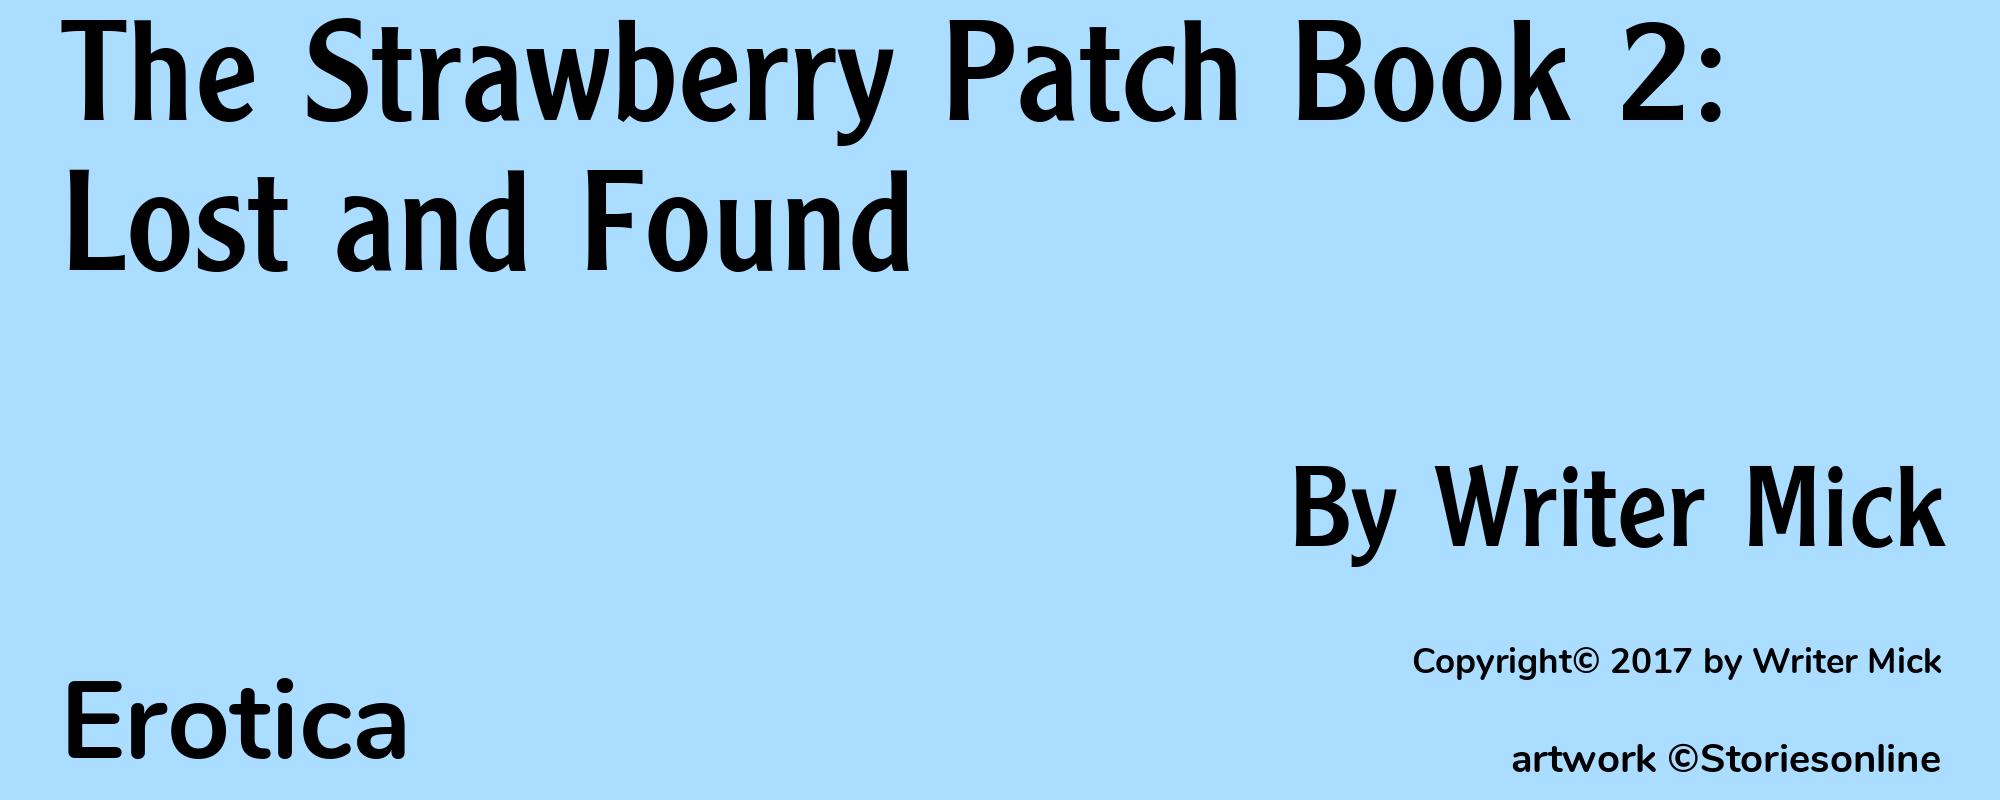 The Strawberry Patch Book 2: Lost and Found - Cover